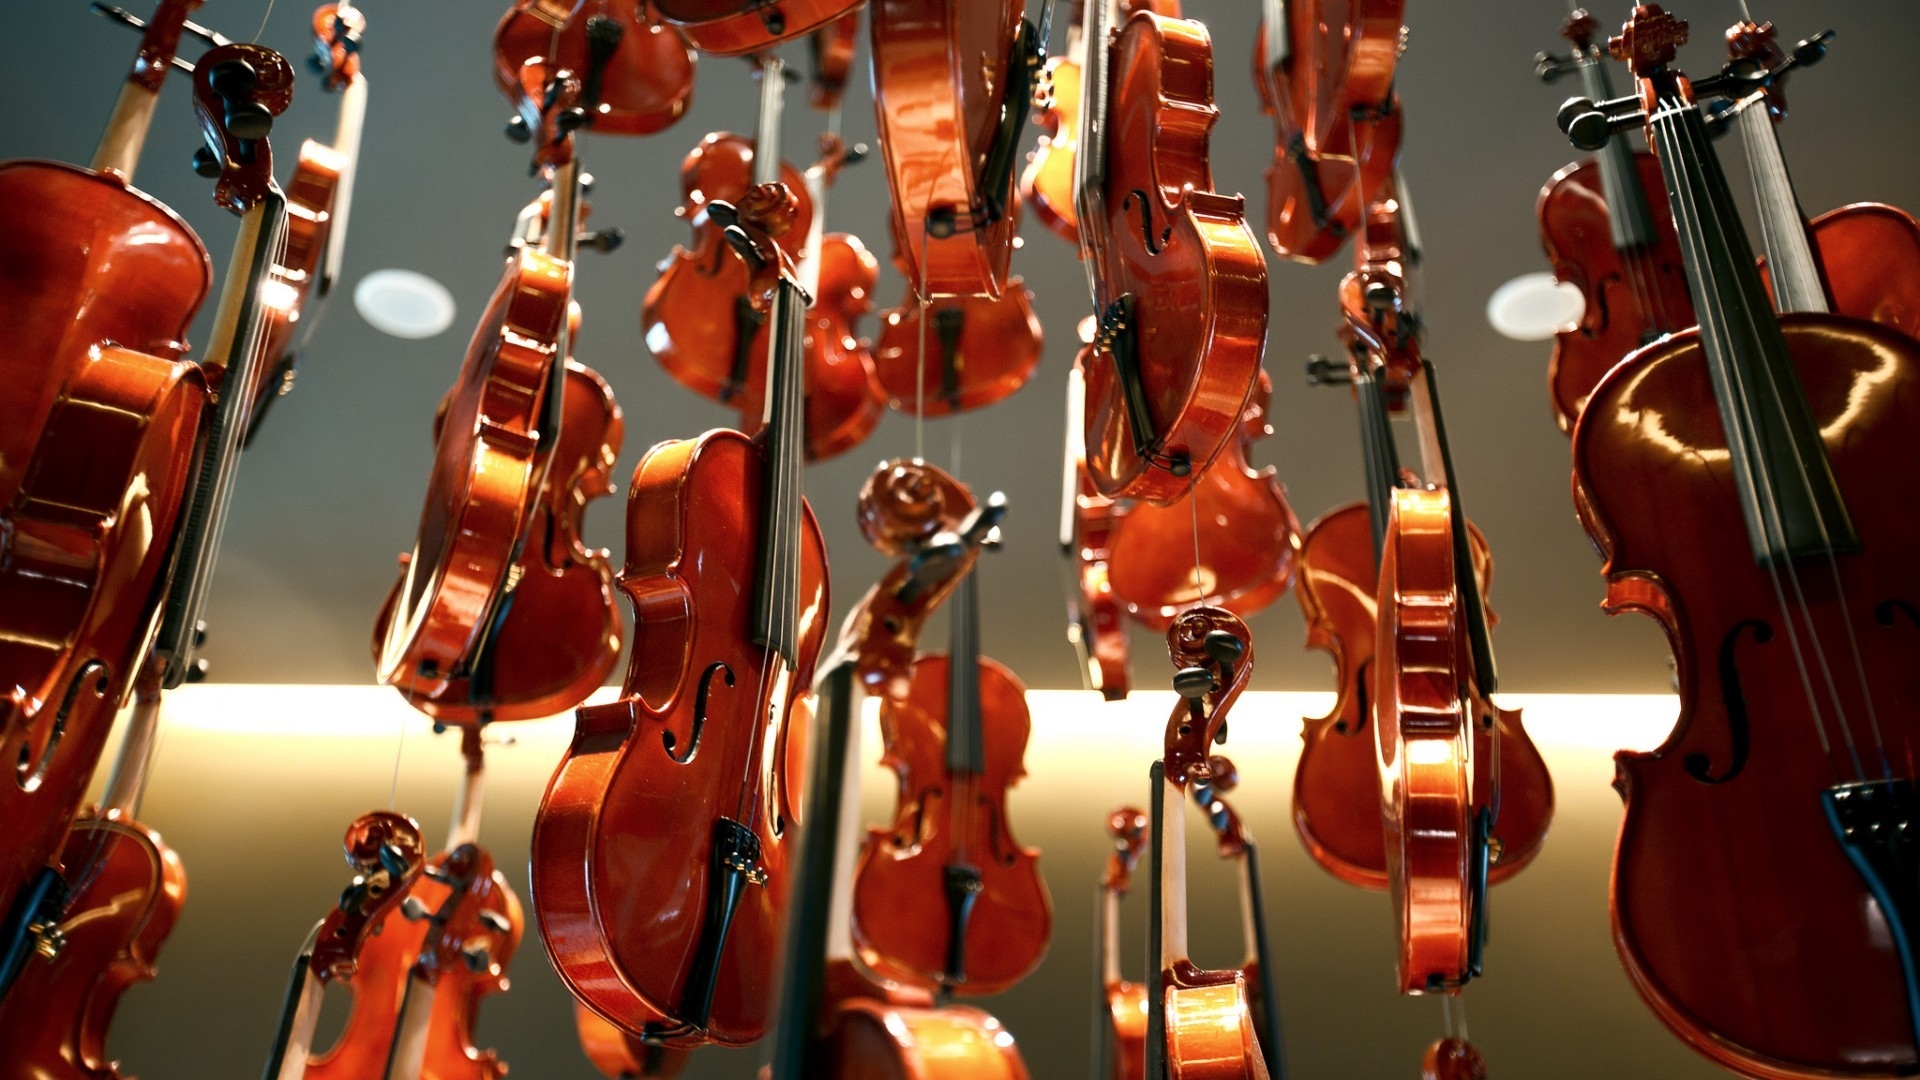 New Violins for 1920 x 1080 HDTV 1080p resolution